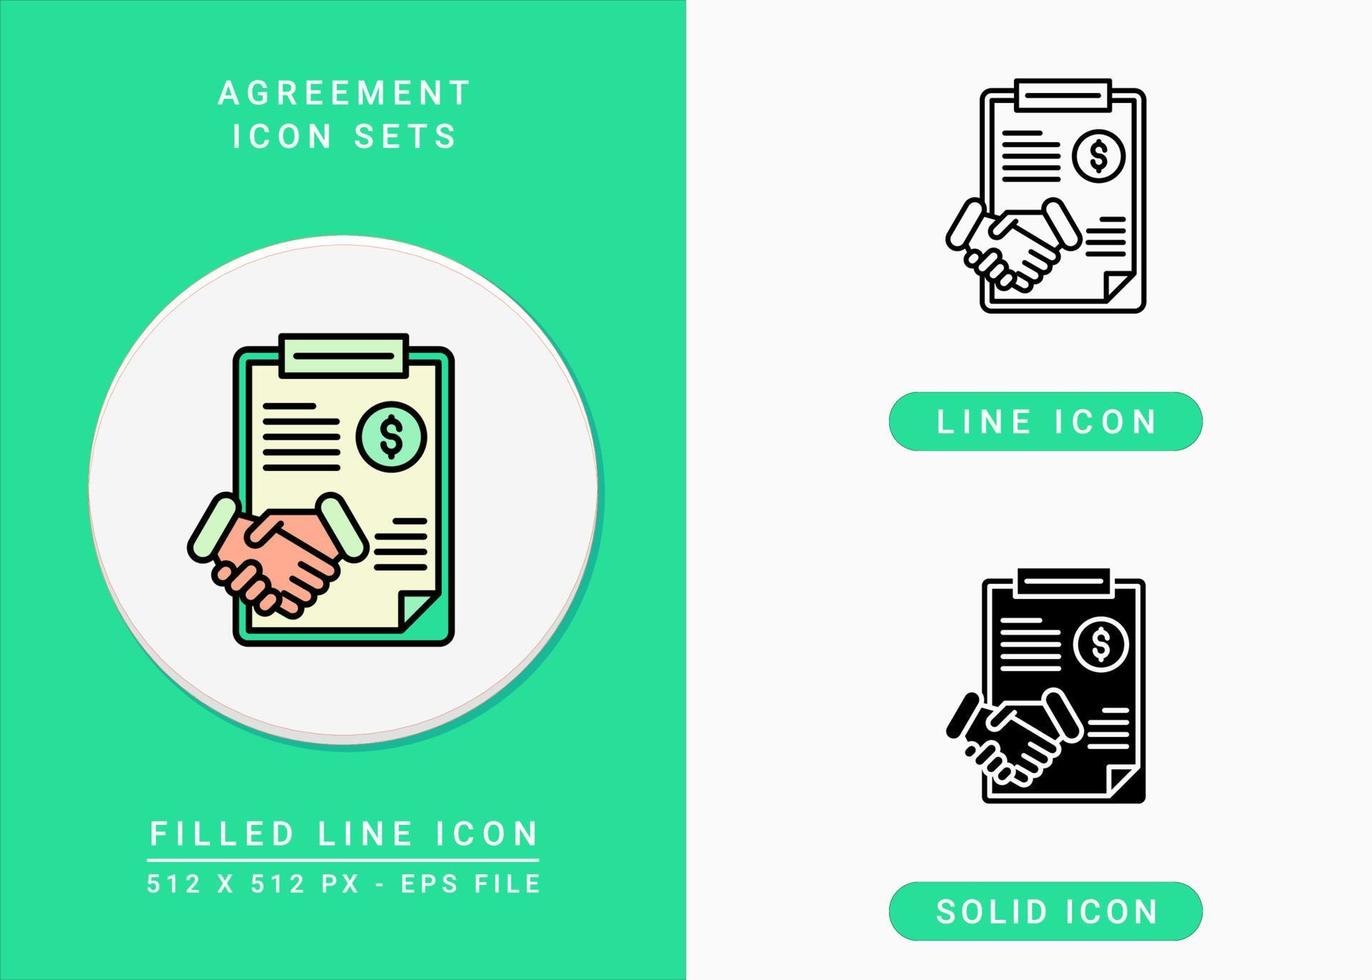 Agreement icons set vector illustration with solid icon line style. People deal collaboration concept. Editable stroke icon on isolated background for web design, infographic and UI mobile app.